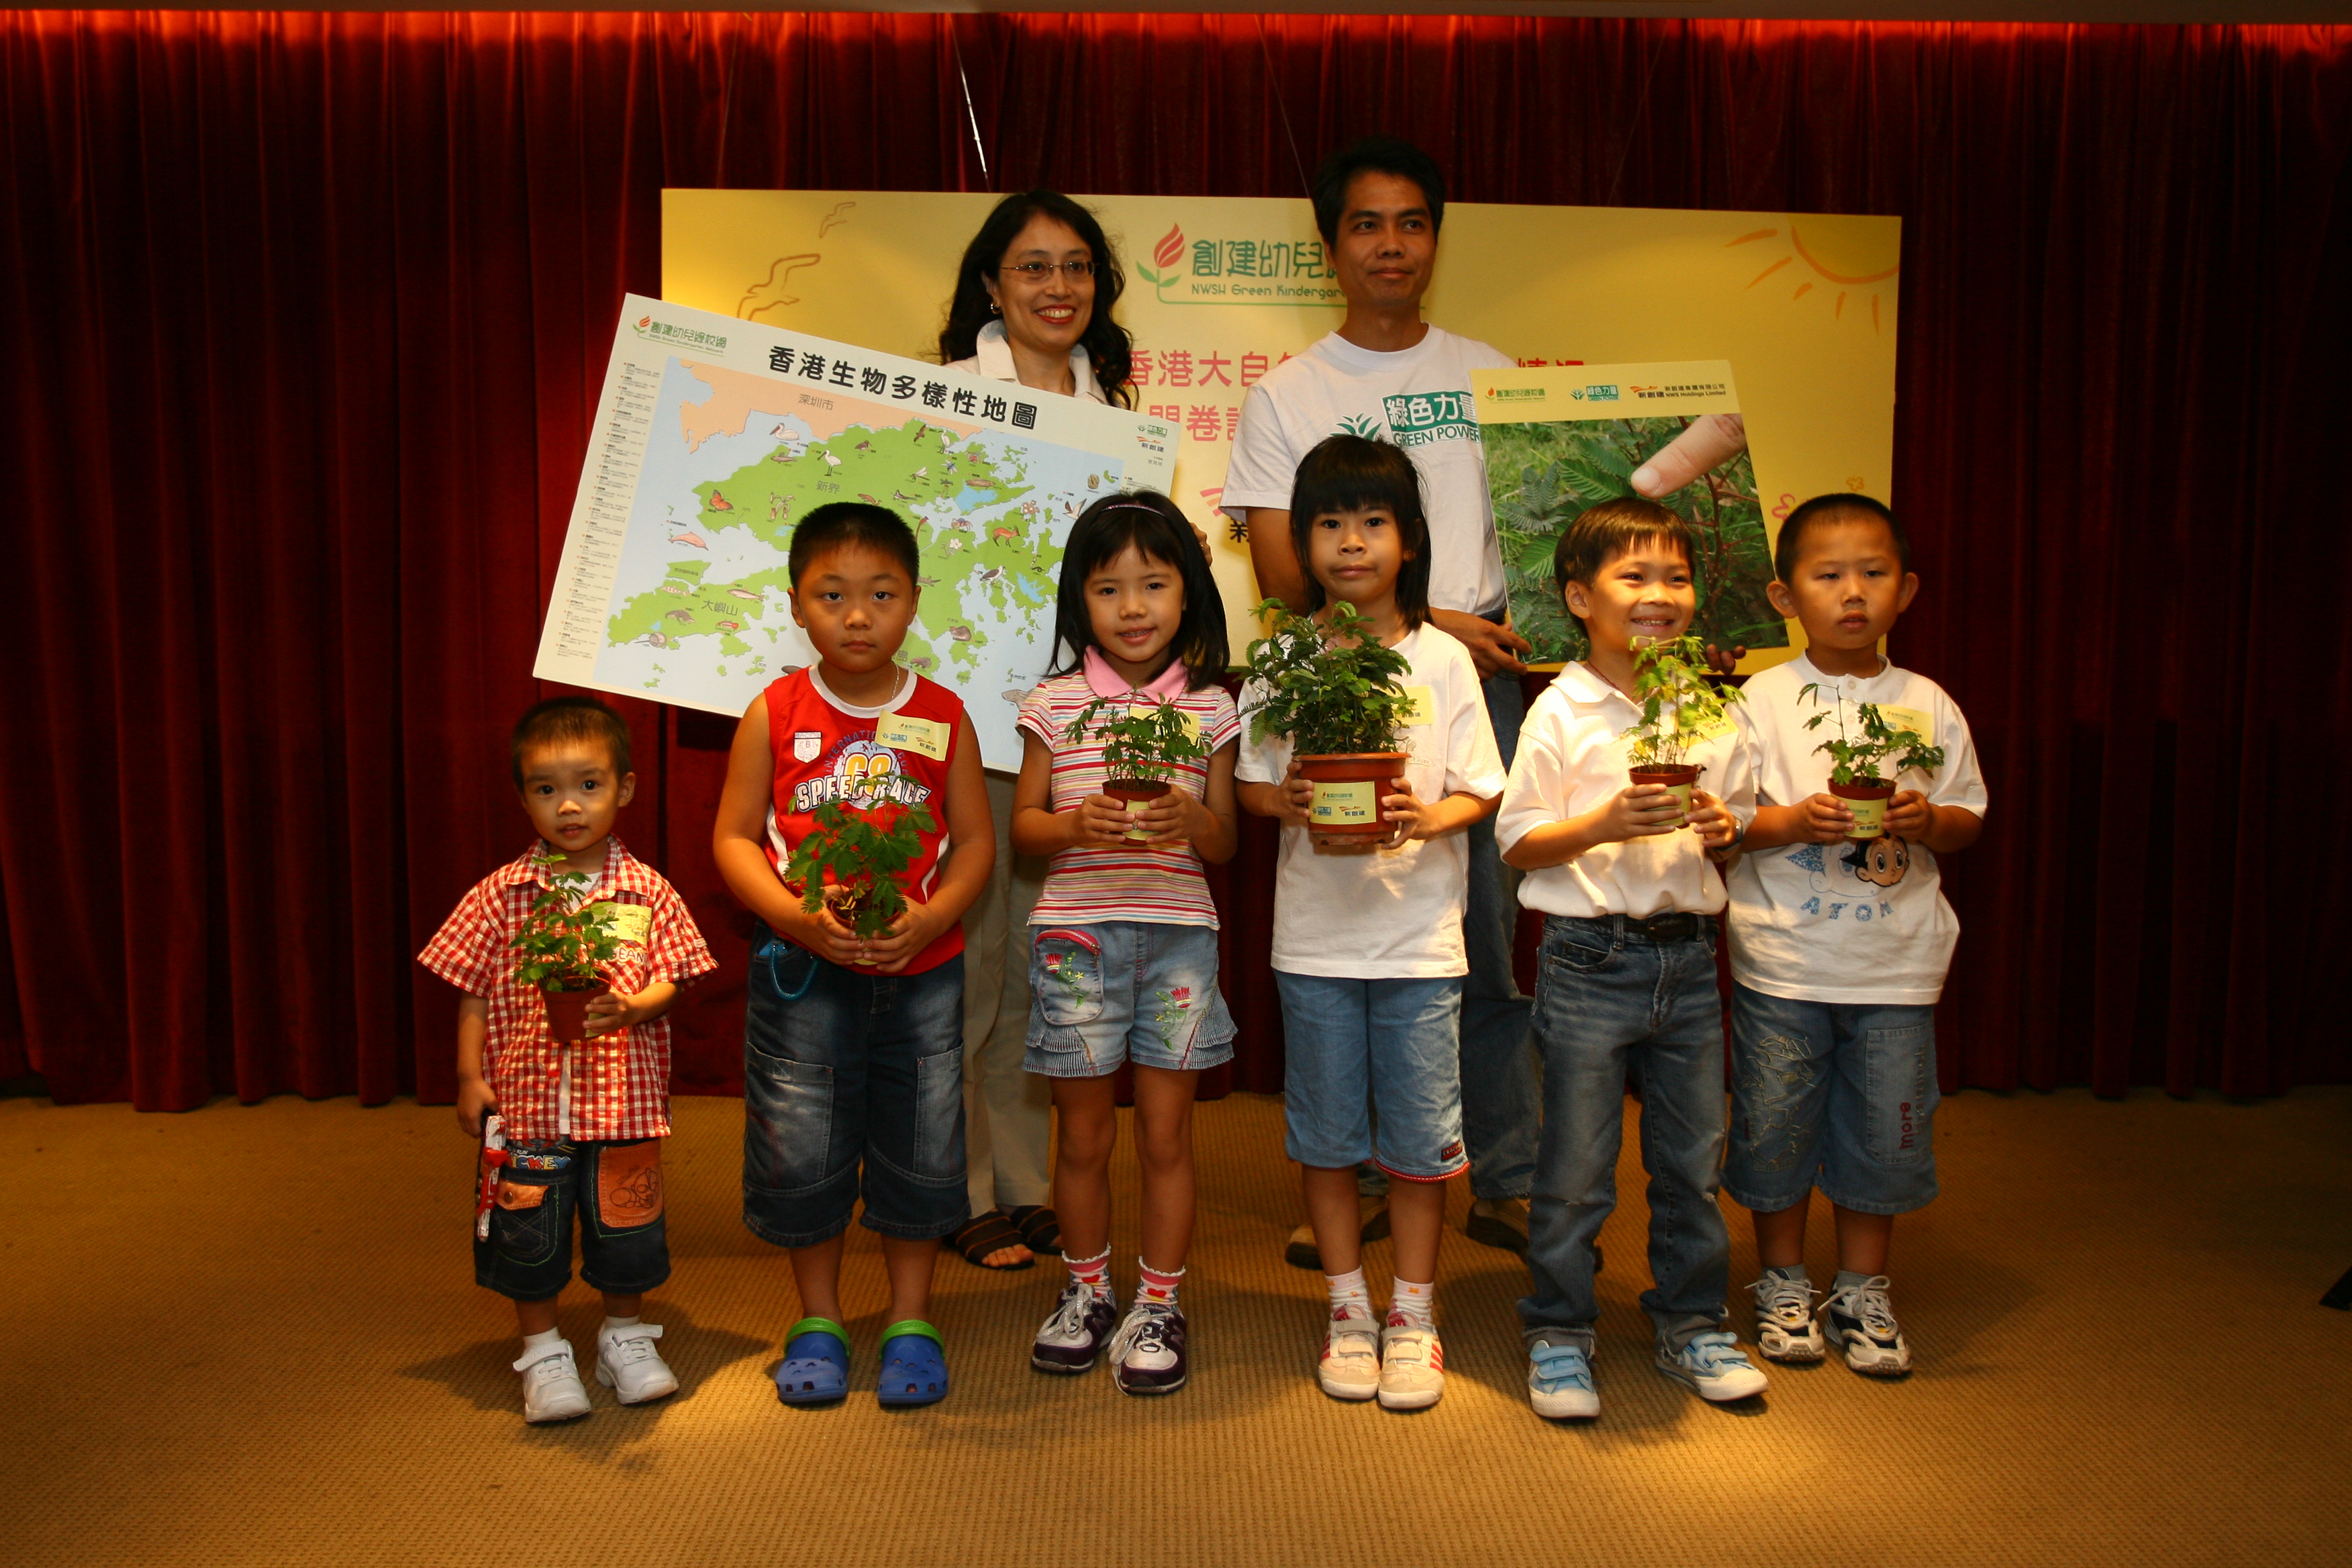 NWS Holdings announced a study on the knowledge and experience with nature of young children